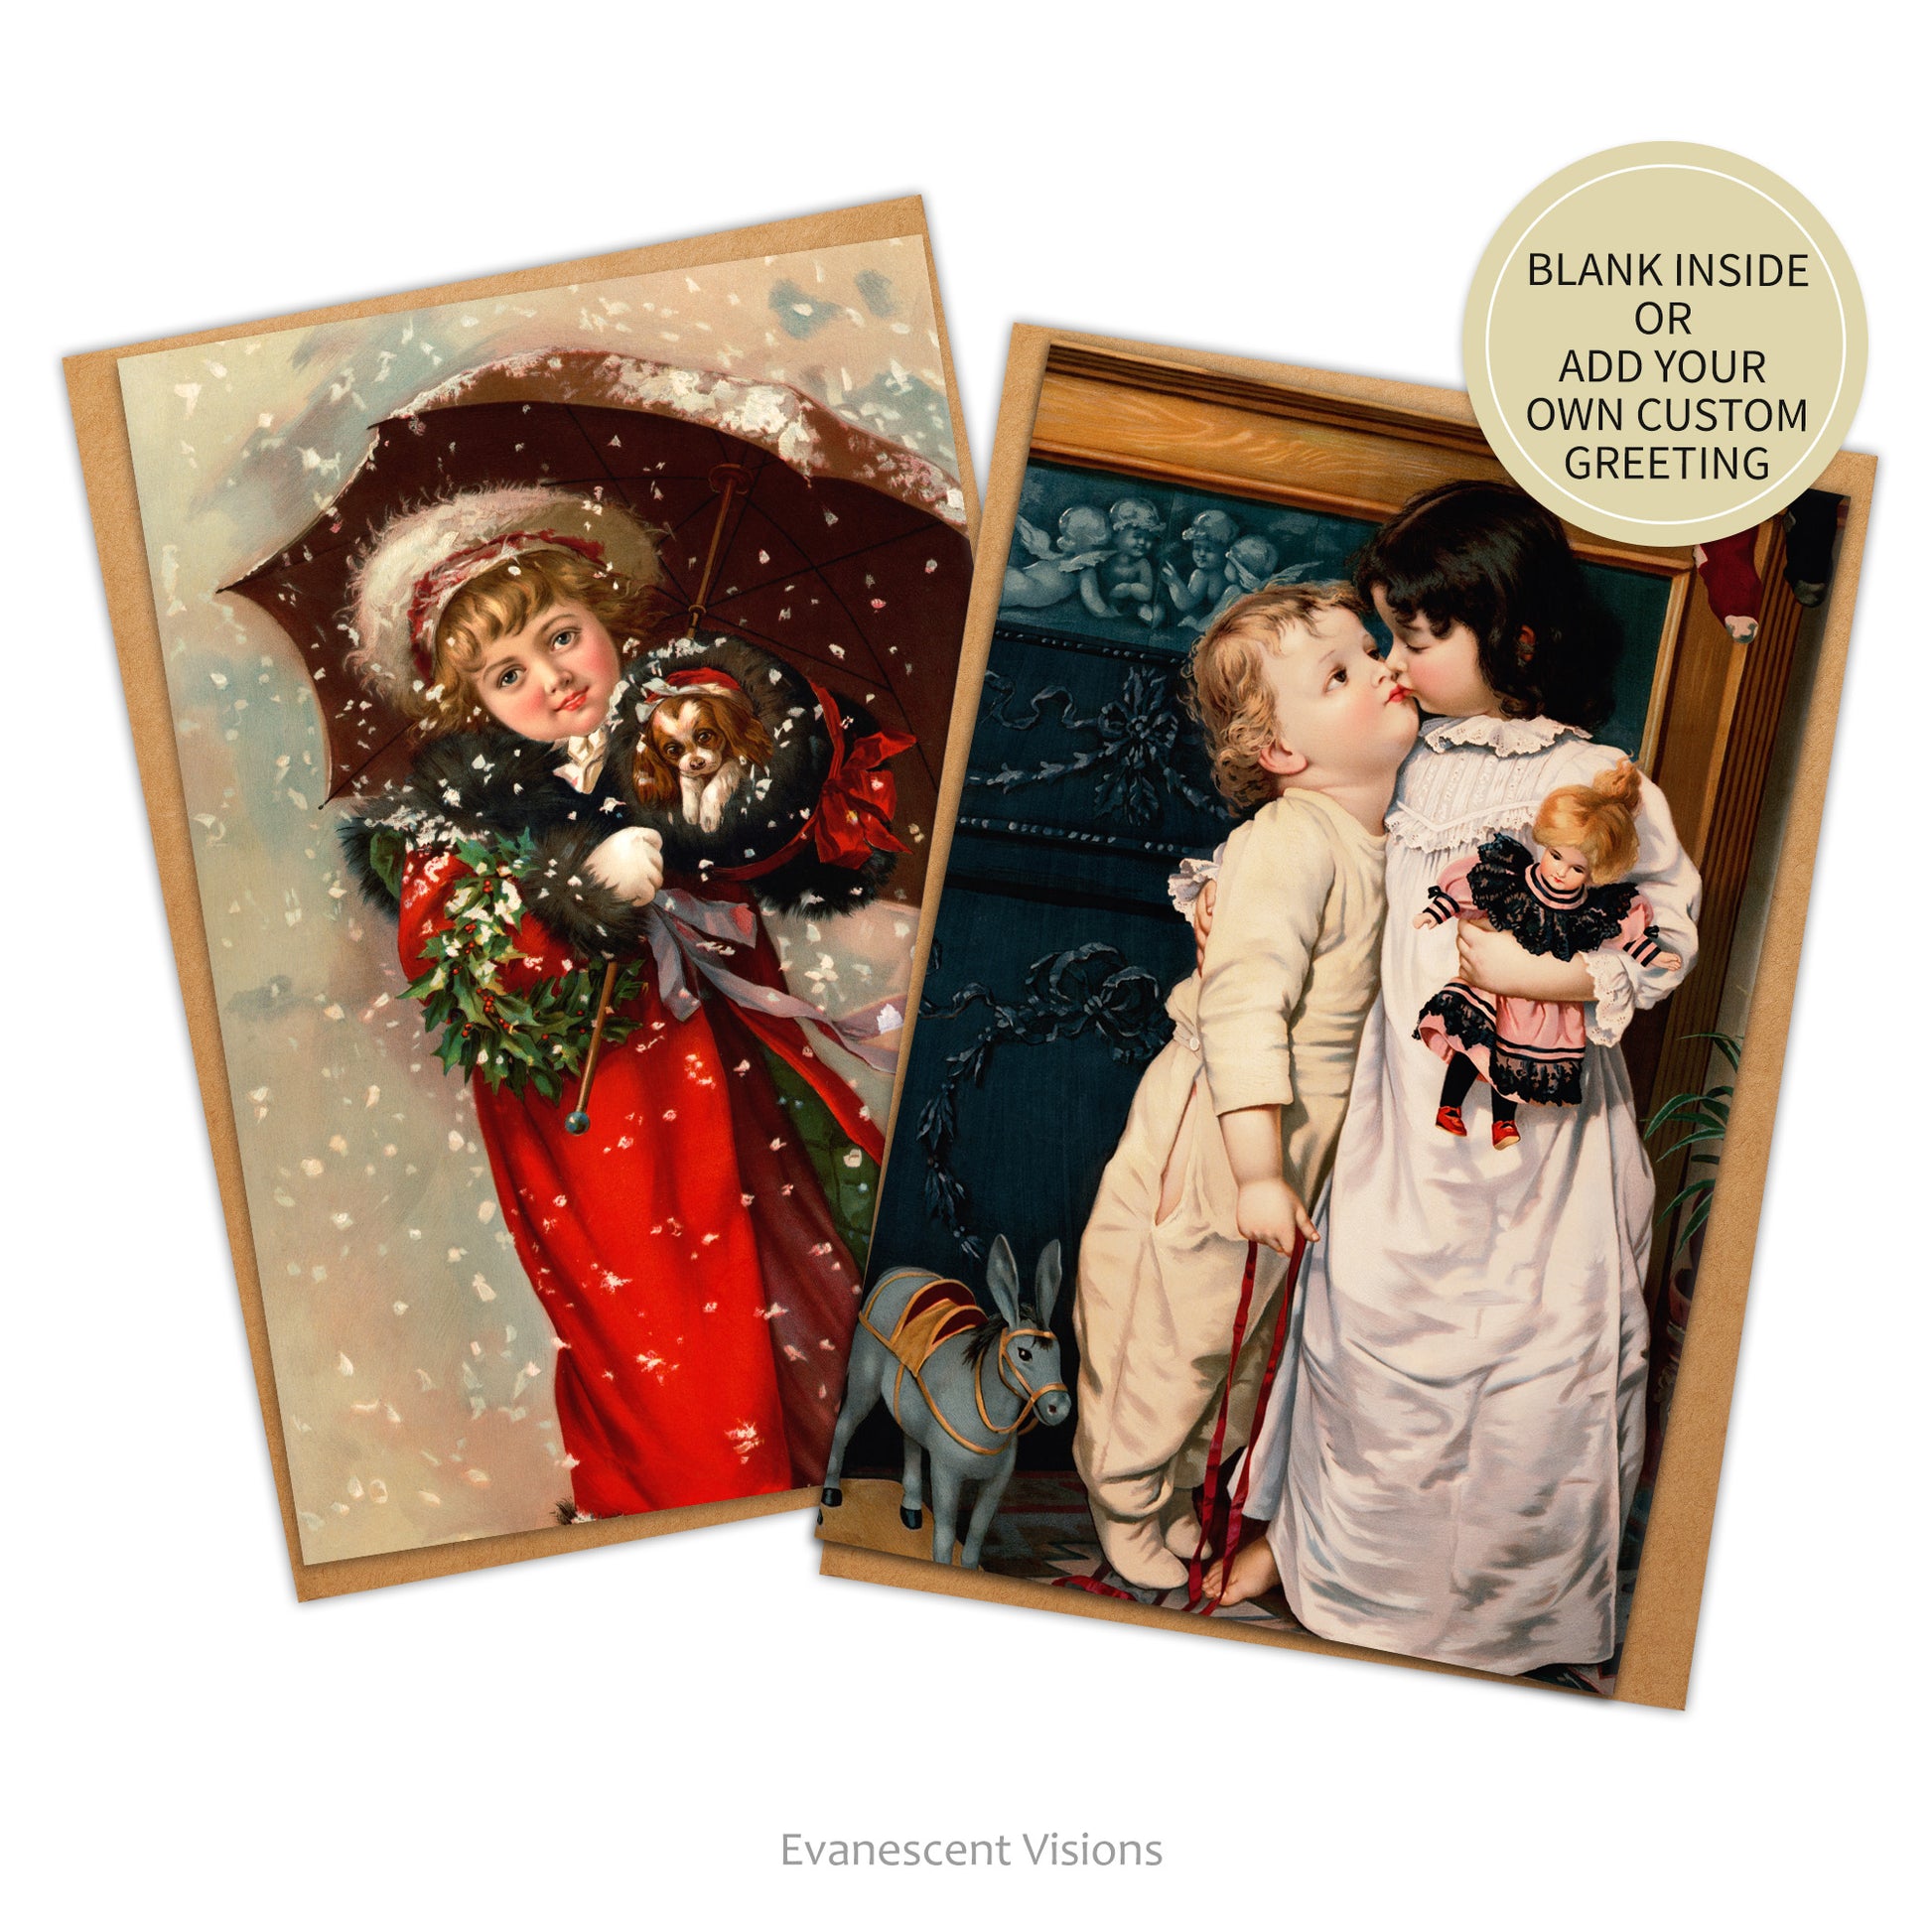 Vintage Christmas Cards with sticker to indicate cards may be blank or have custom greetings